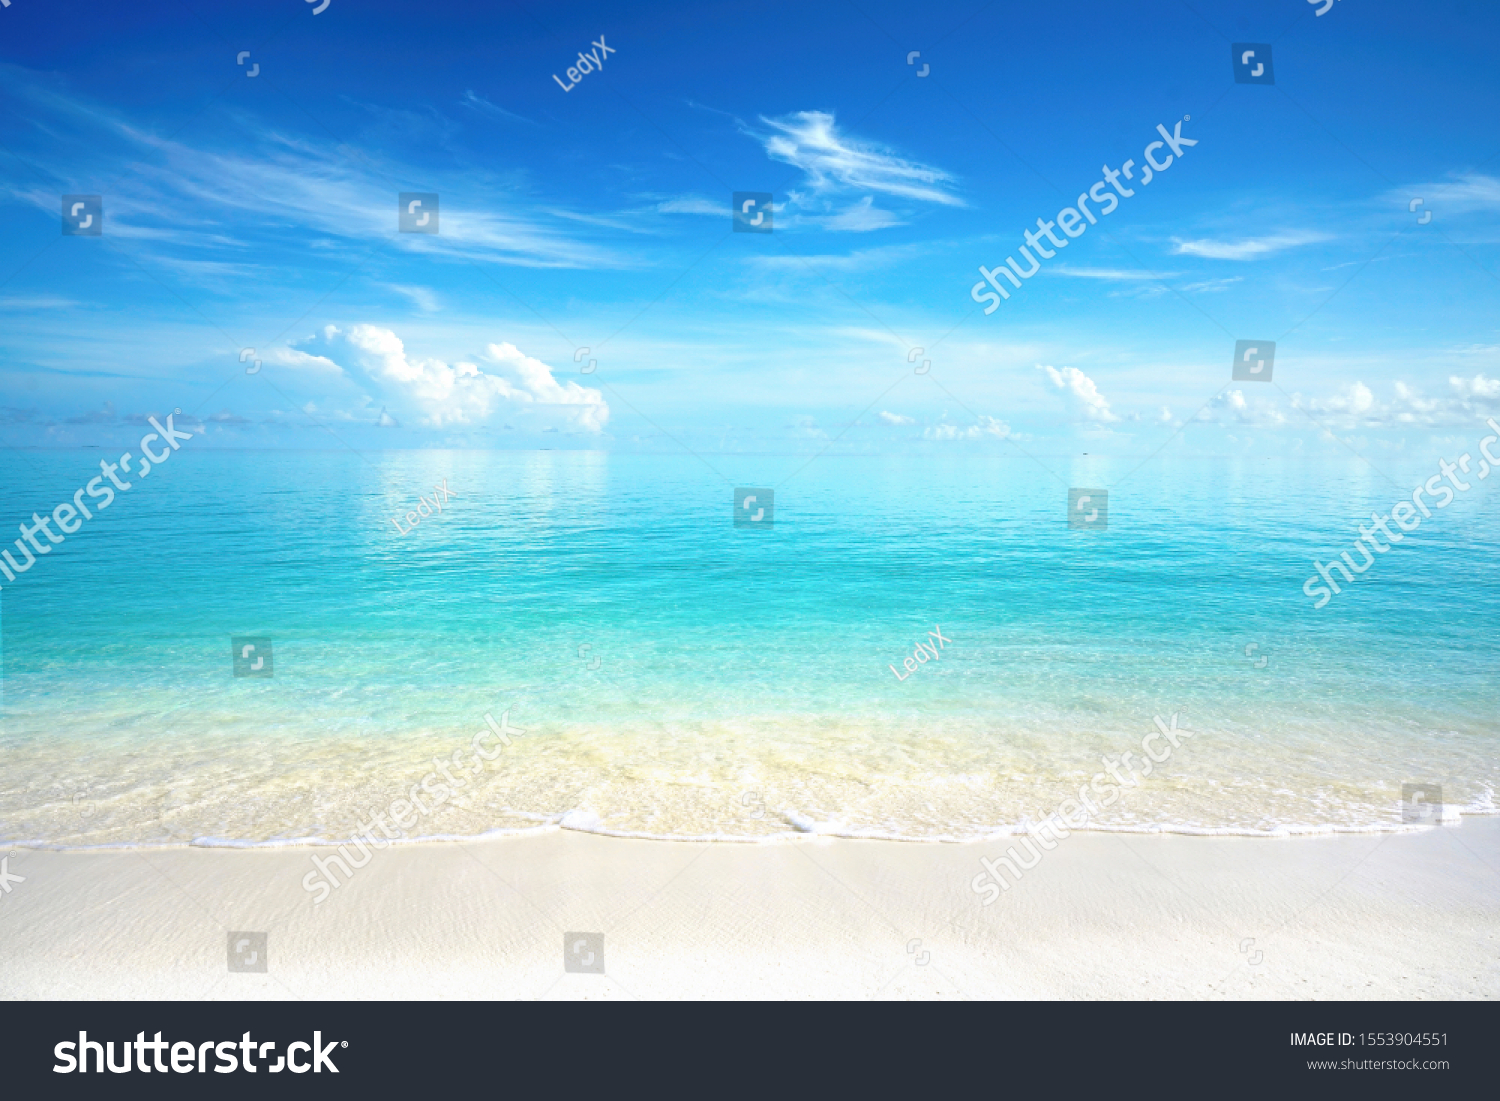 Beautiful sandy beach with white sand and rolling calm wave of turquoise ocean on Sunny day. White clouds in blue sky are reflected in water. Maldives, perfect scenery landscape, copy space. #1553904551